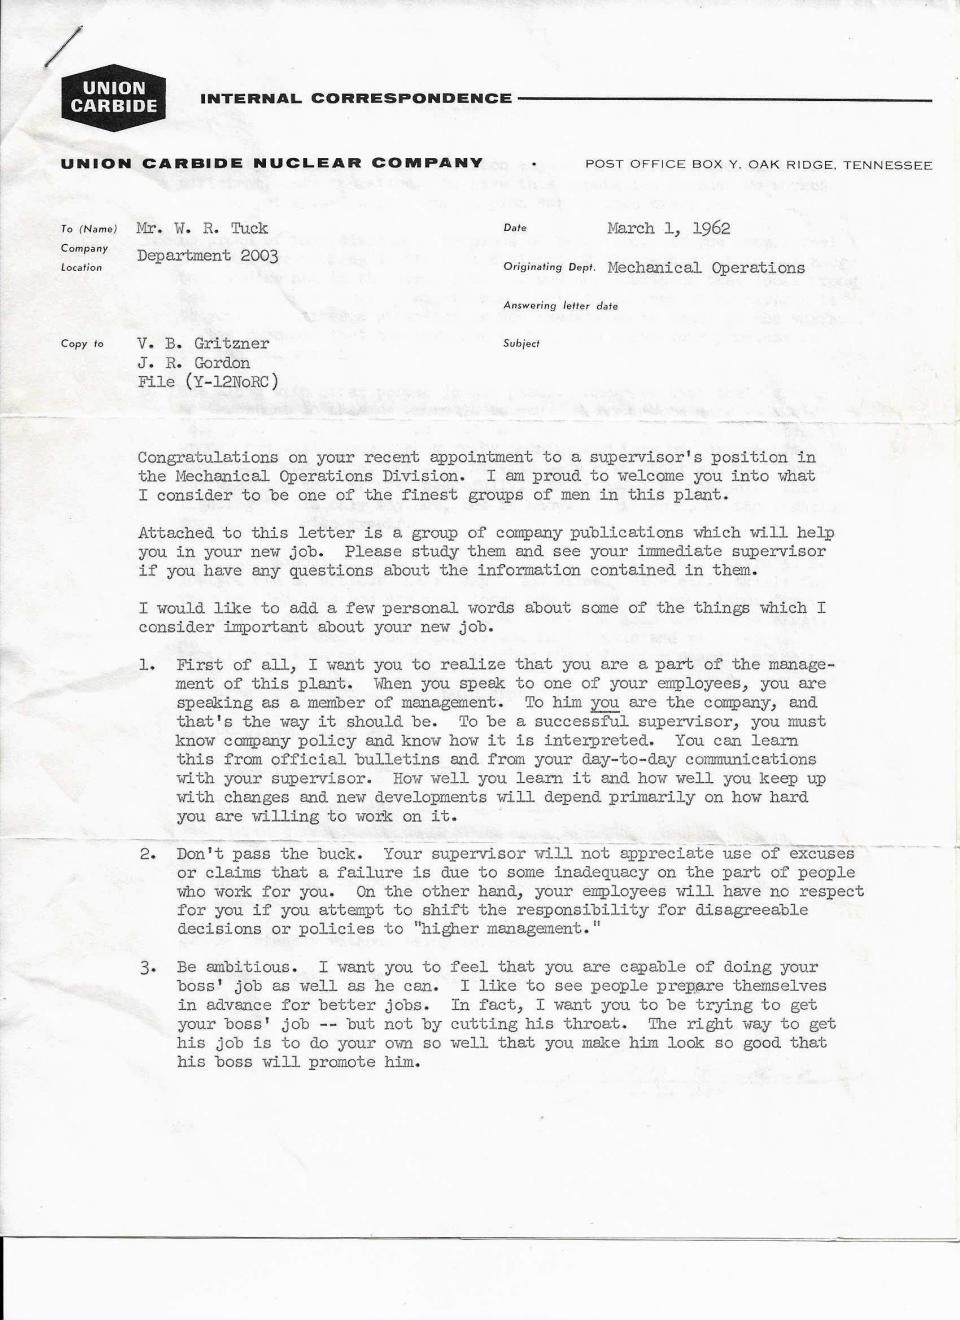 Page one of Jack Case letter to Bob Tuck.